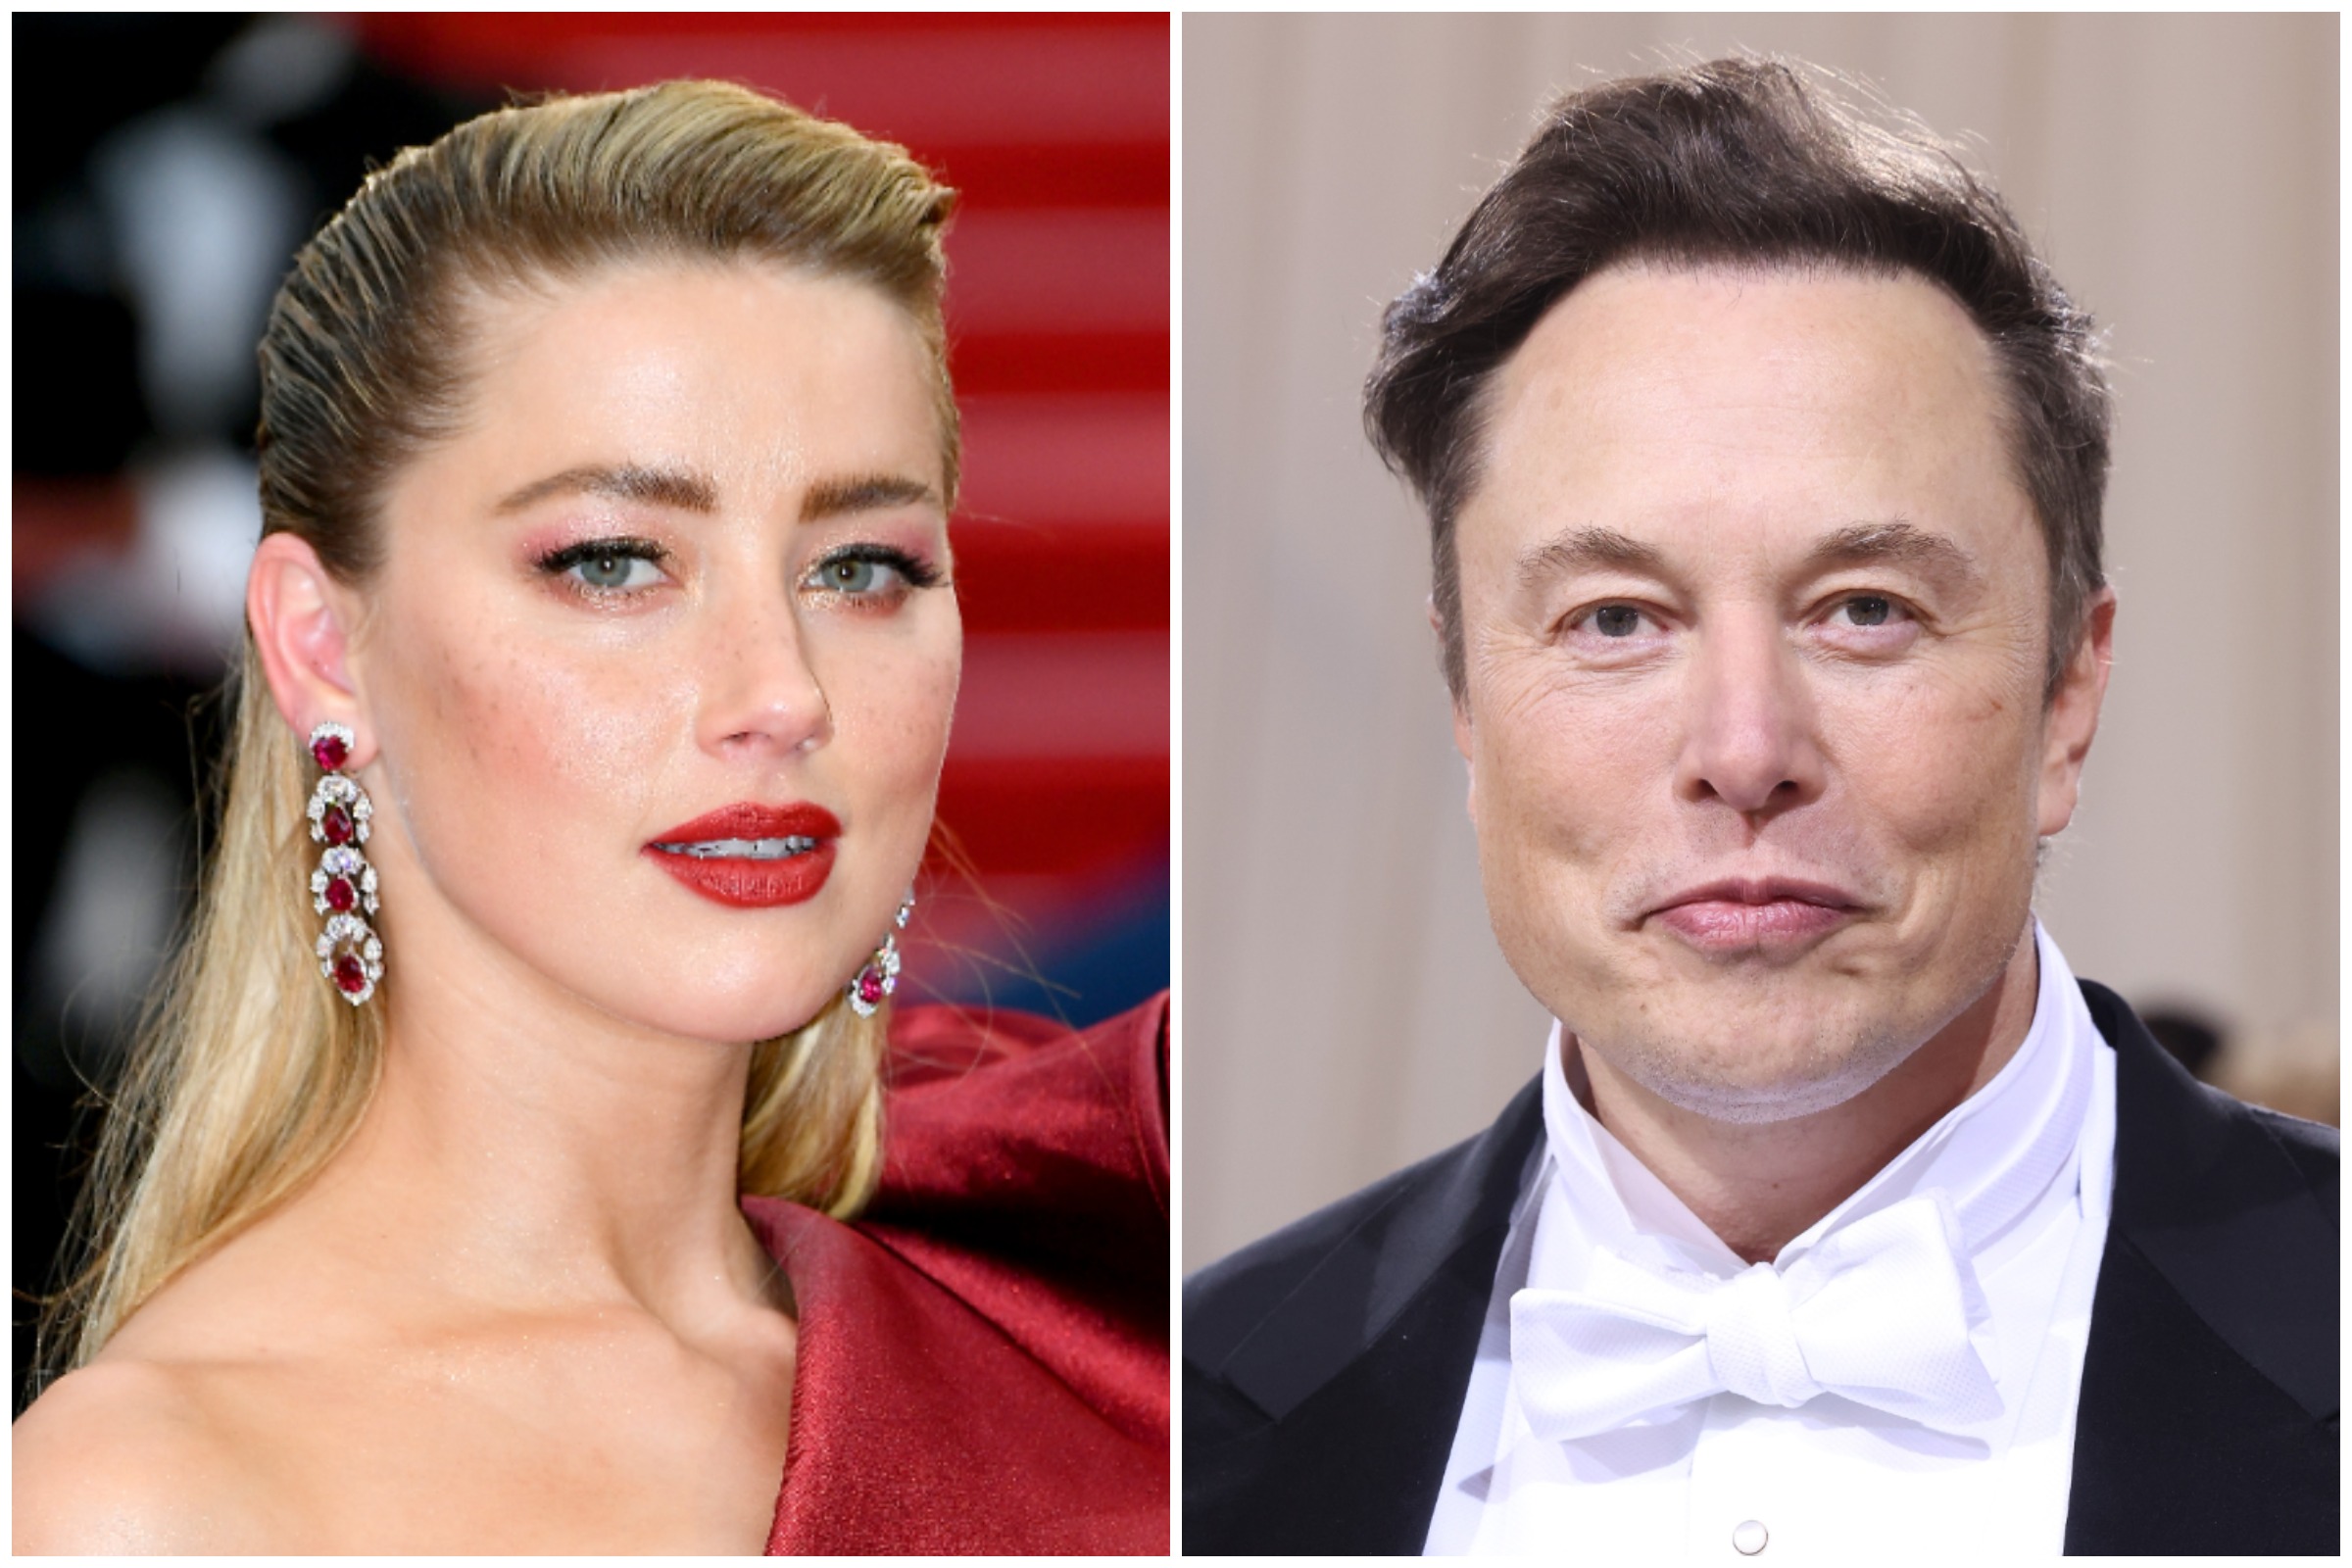 Elon Musk and Amber Heard: A Timeline of Their Relationship